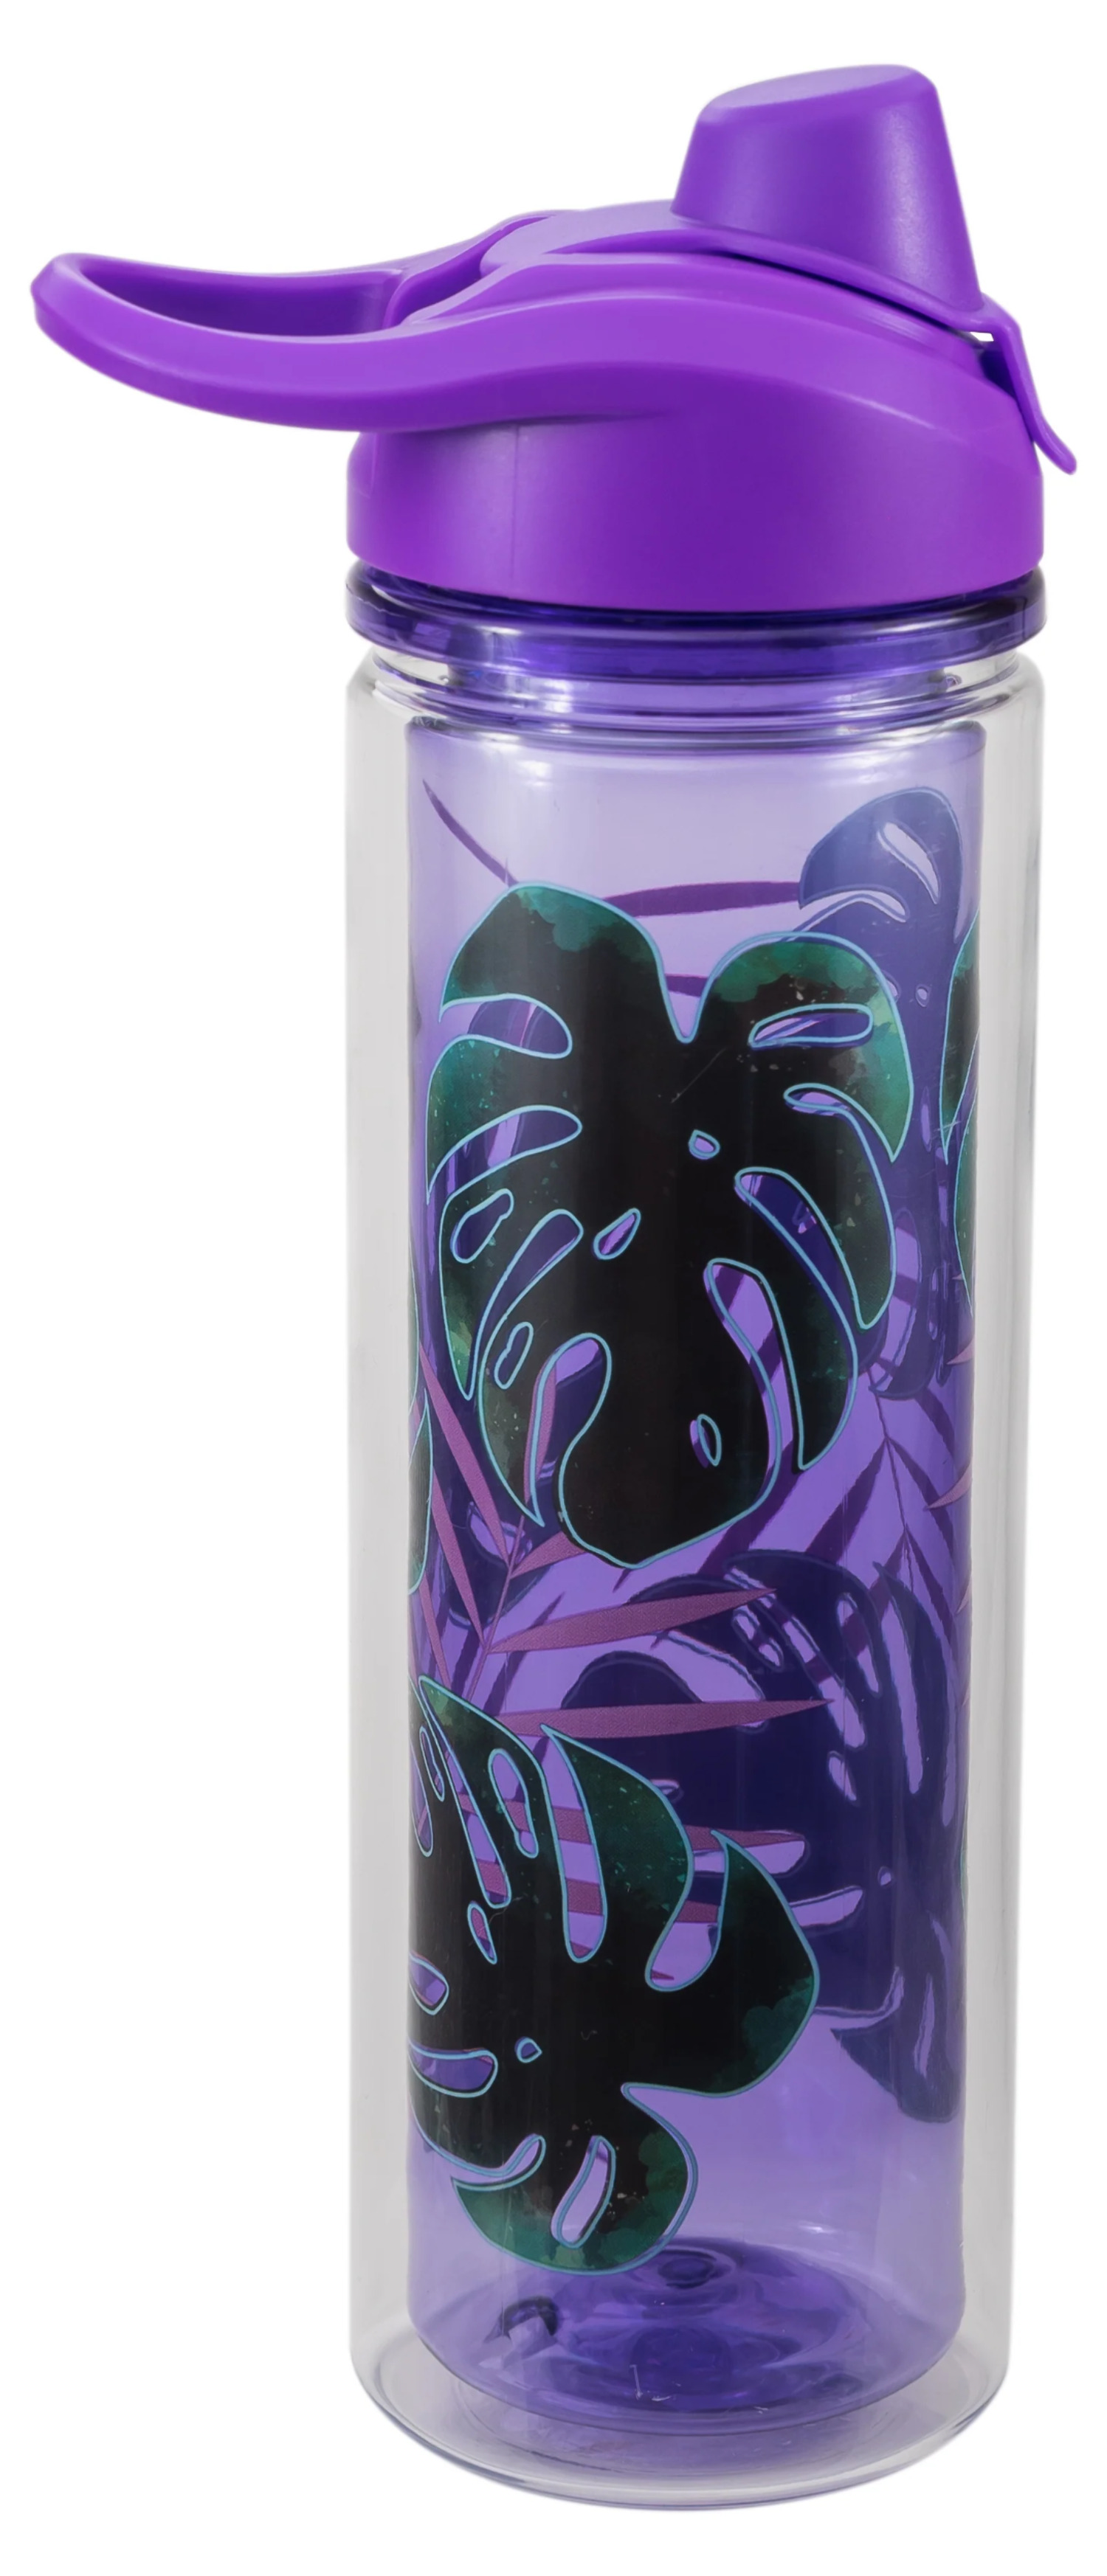 COOL GEAR 2-Pack 20 oz Essence Chugger Water Bottle with Wide Mouth & Flip Cap Design - Stay Wild/Fierce - image 5 of 6